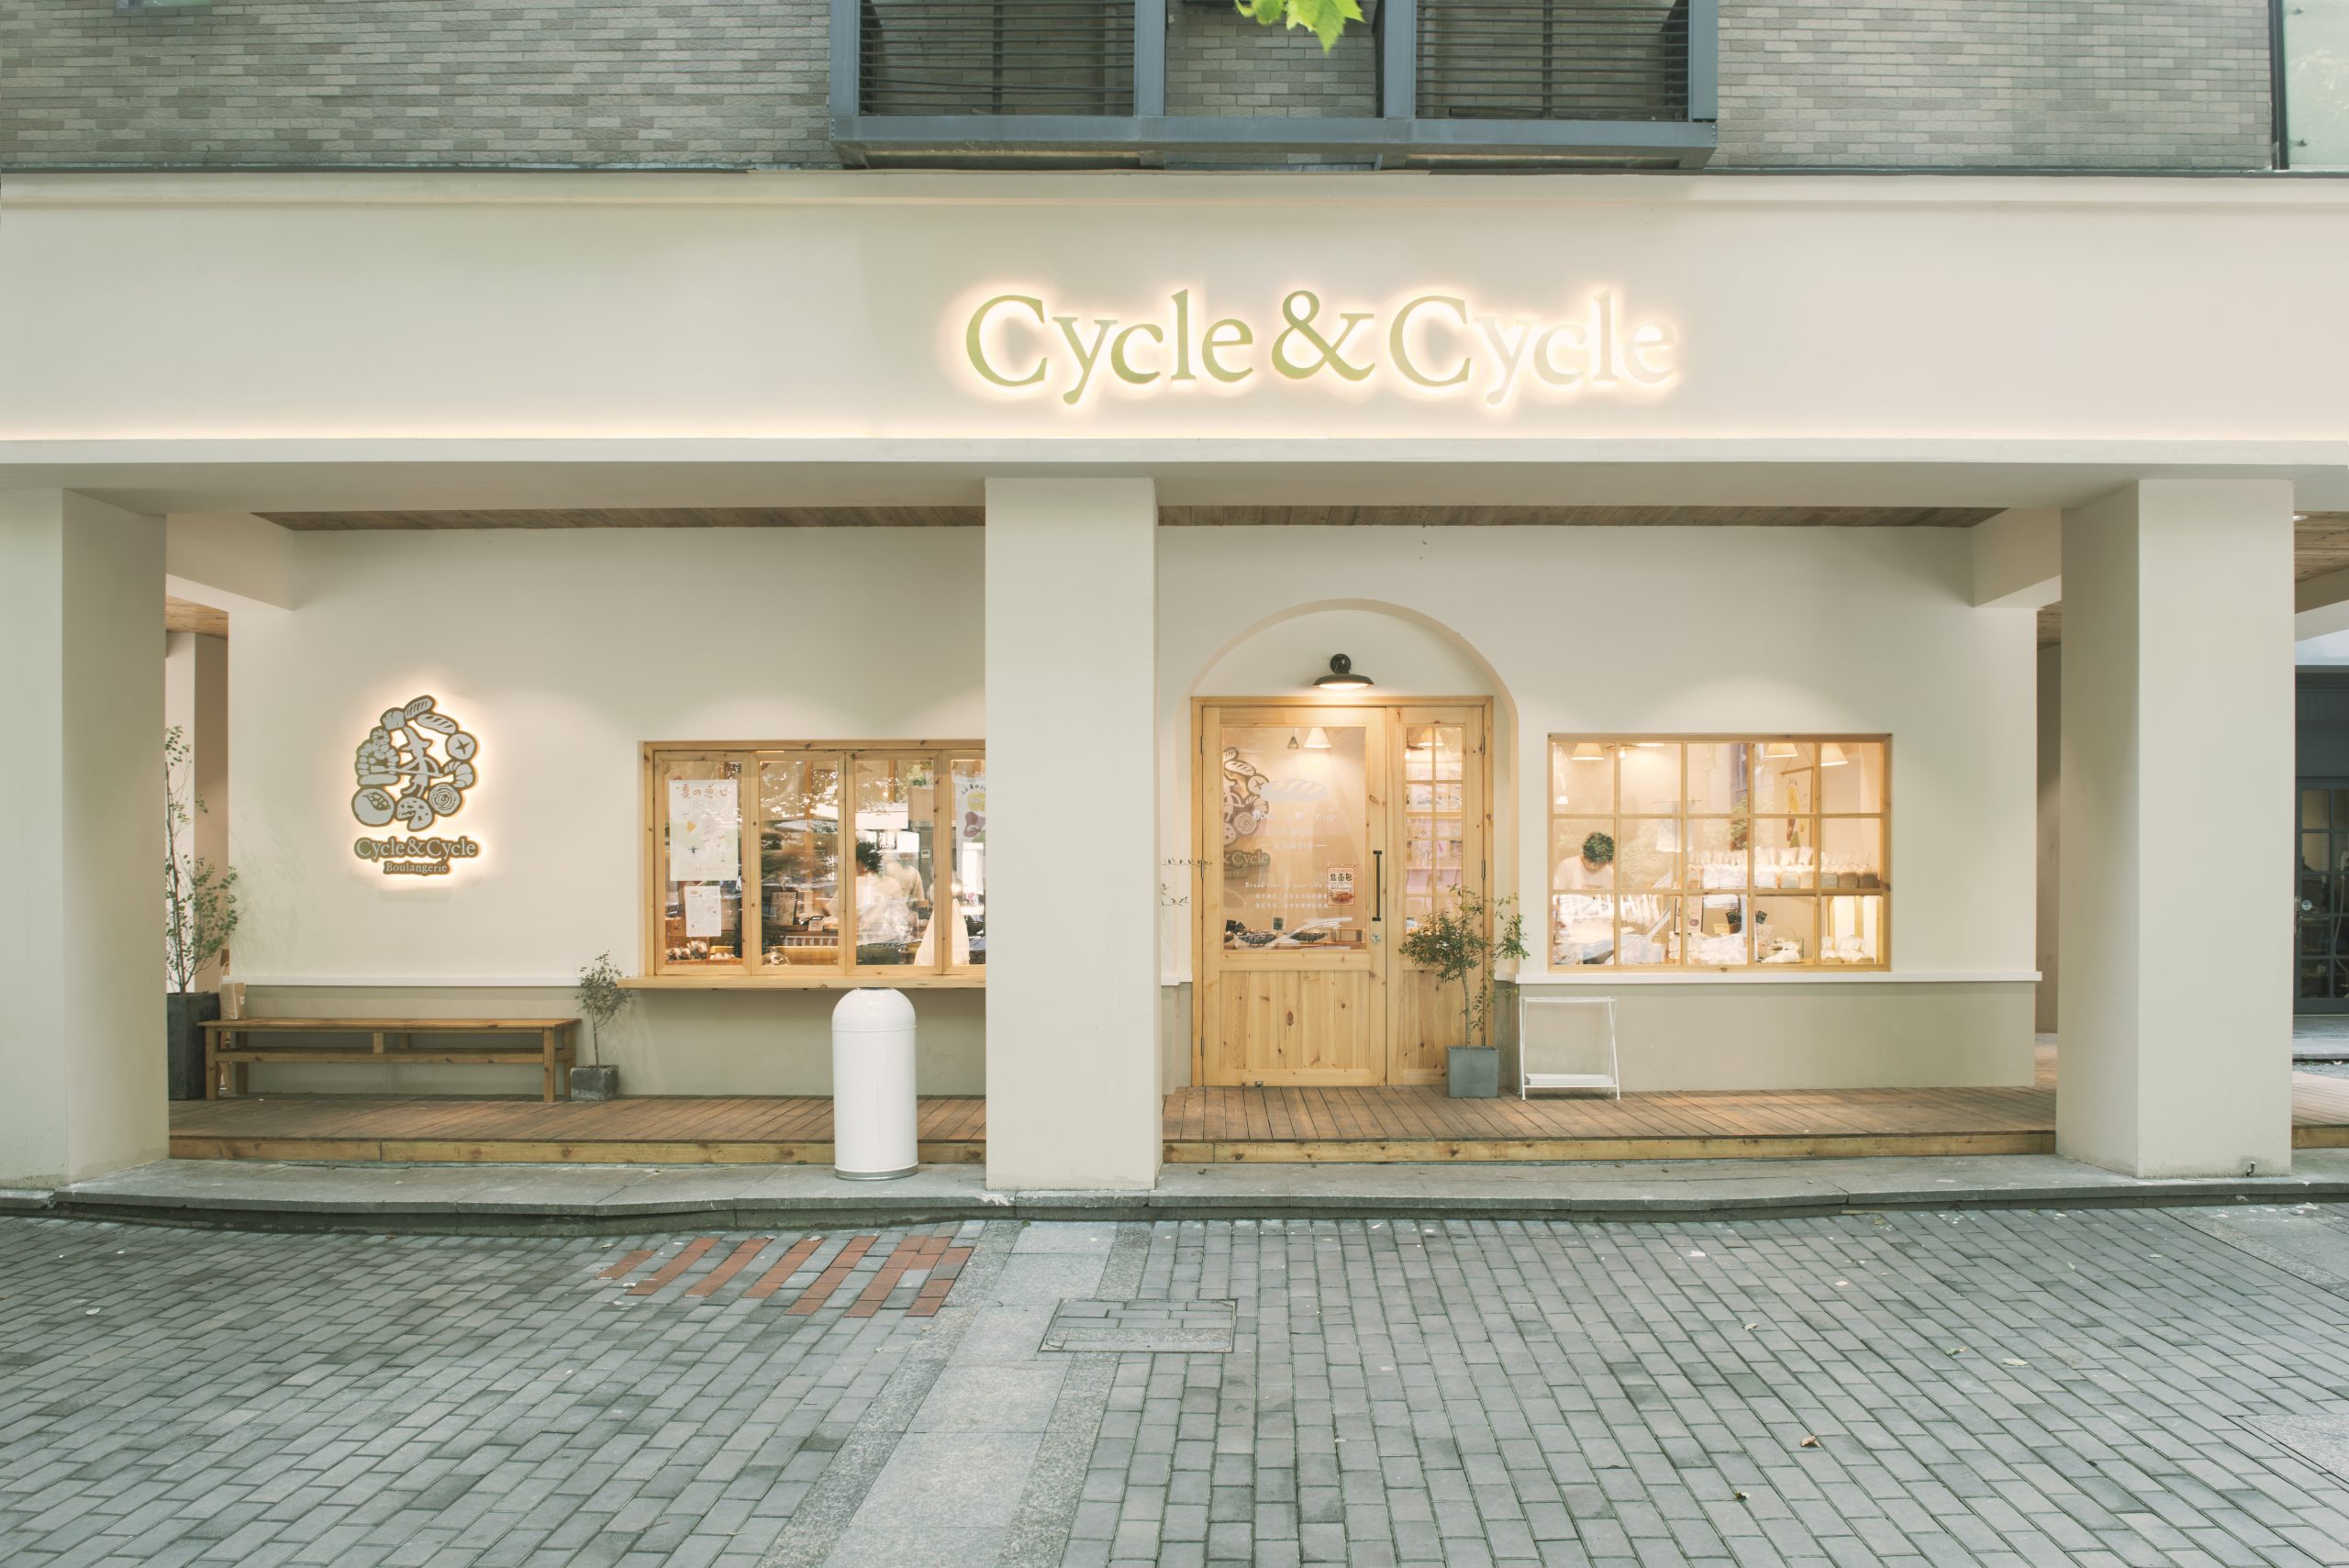 Cycle＆Cycle（益乐路）